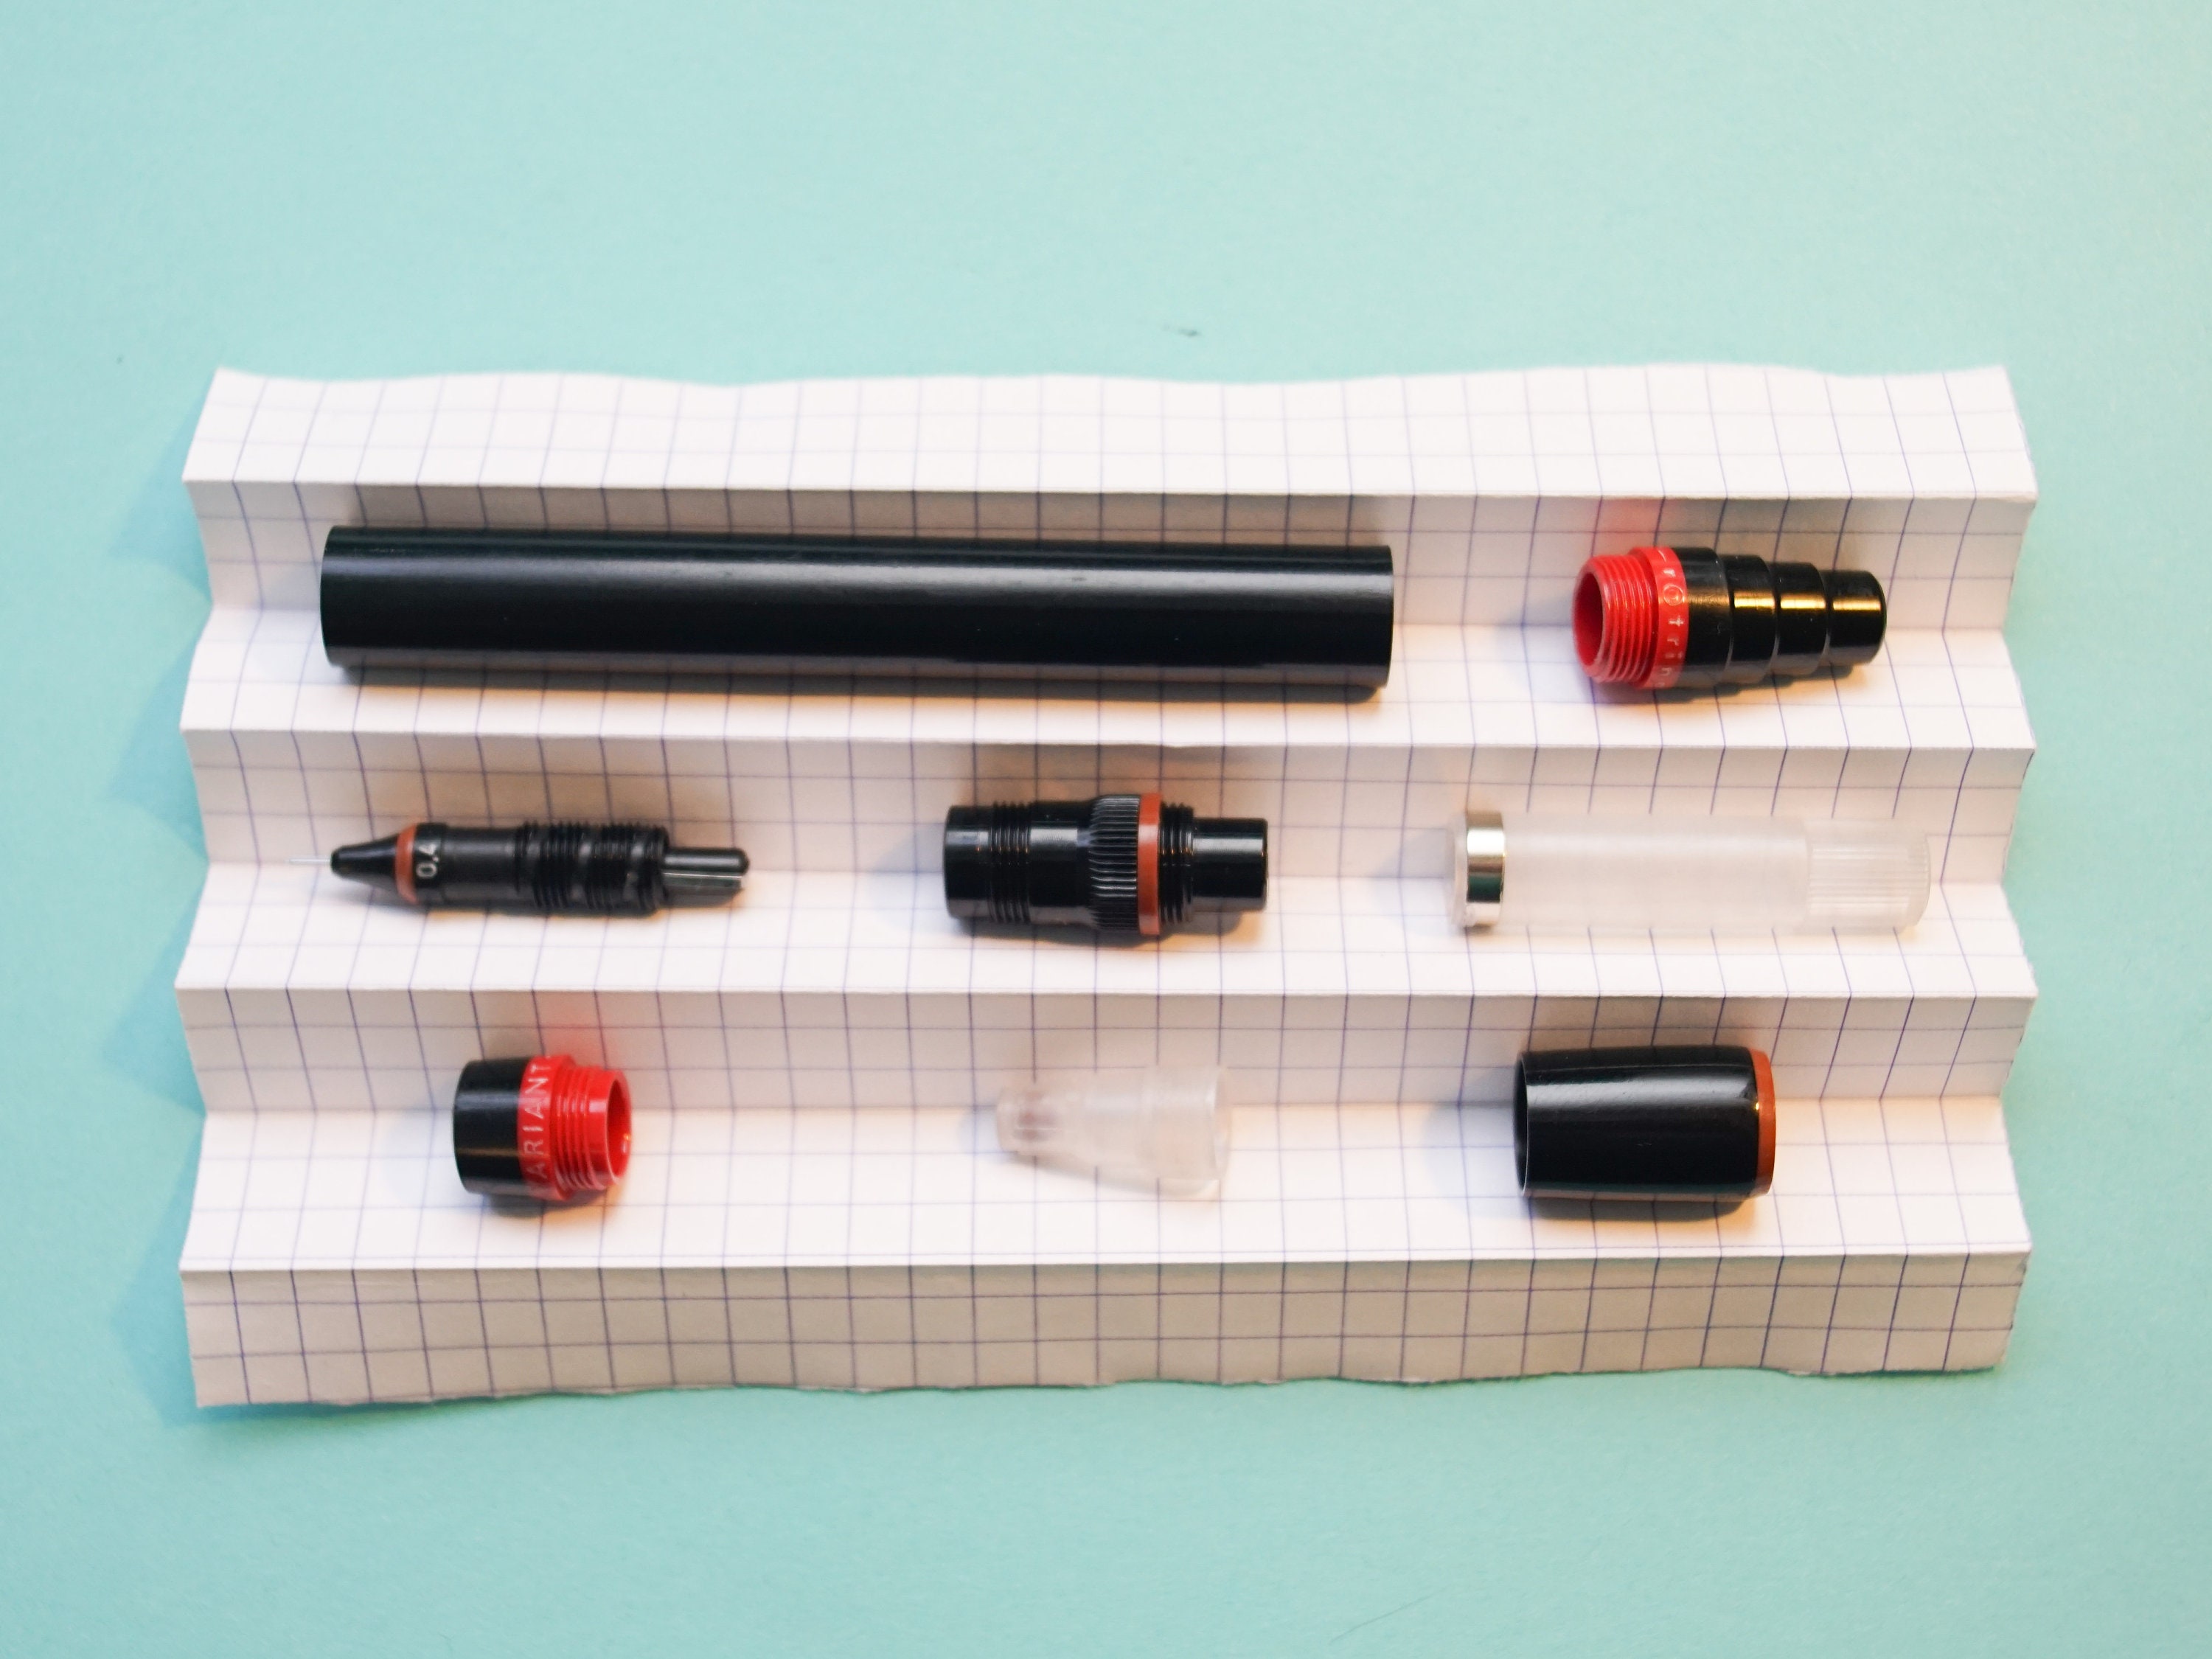 Refurbished Rotring Variant Technical Drawing Pen 0.4 